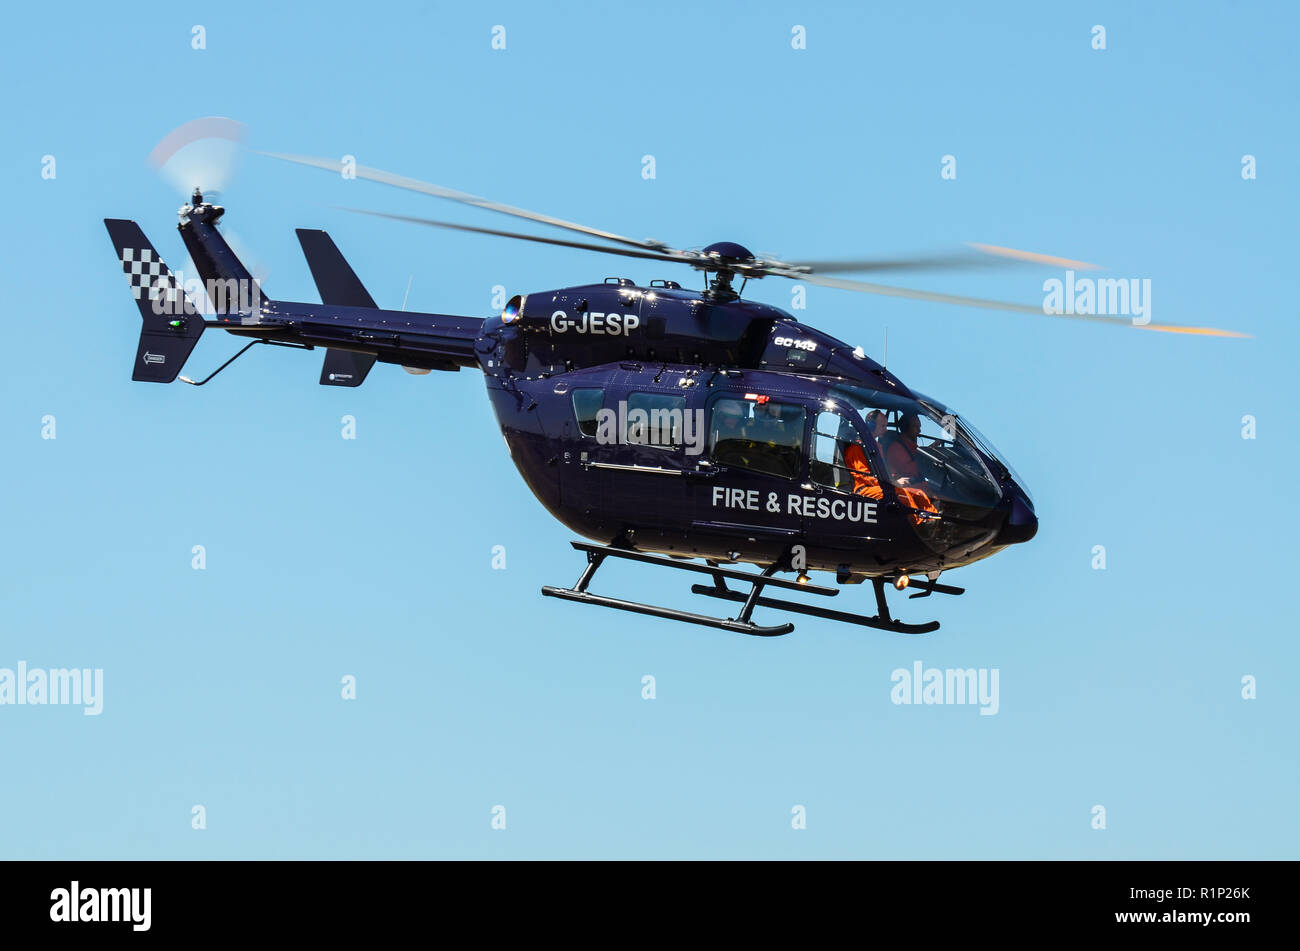 Eurocopter EC145 MBB BK117 G-JESP Fire and Rescue helicopter. Emergency response helicopter. Flying. Space for copy Stock Photo